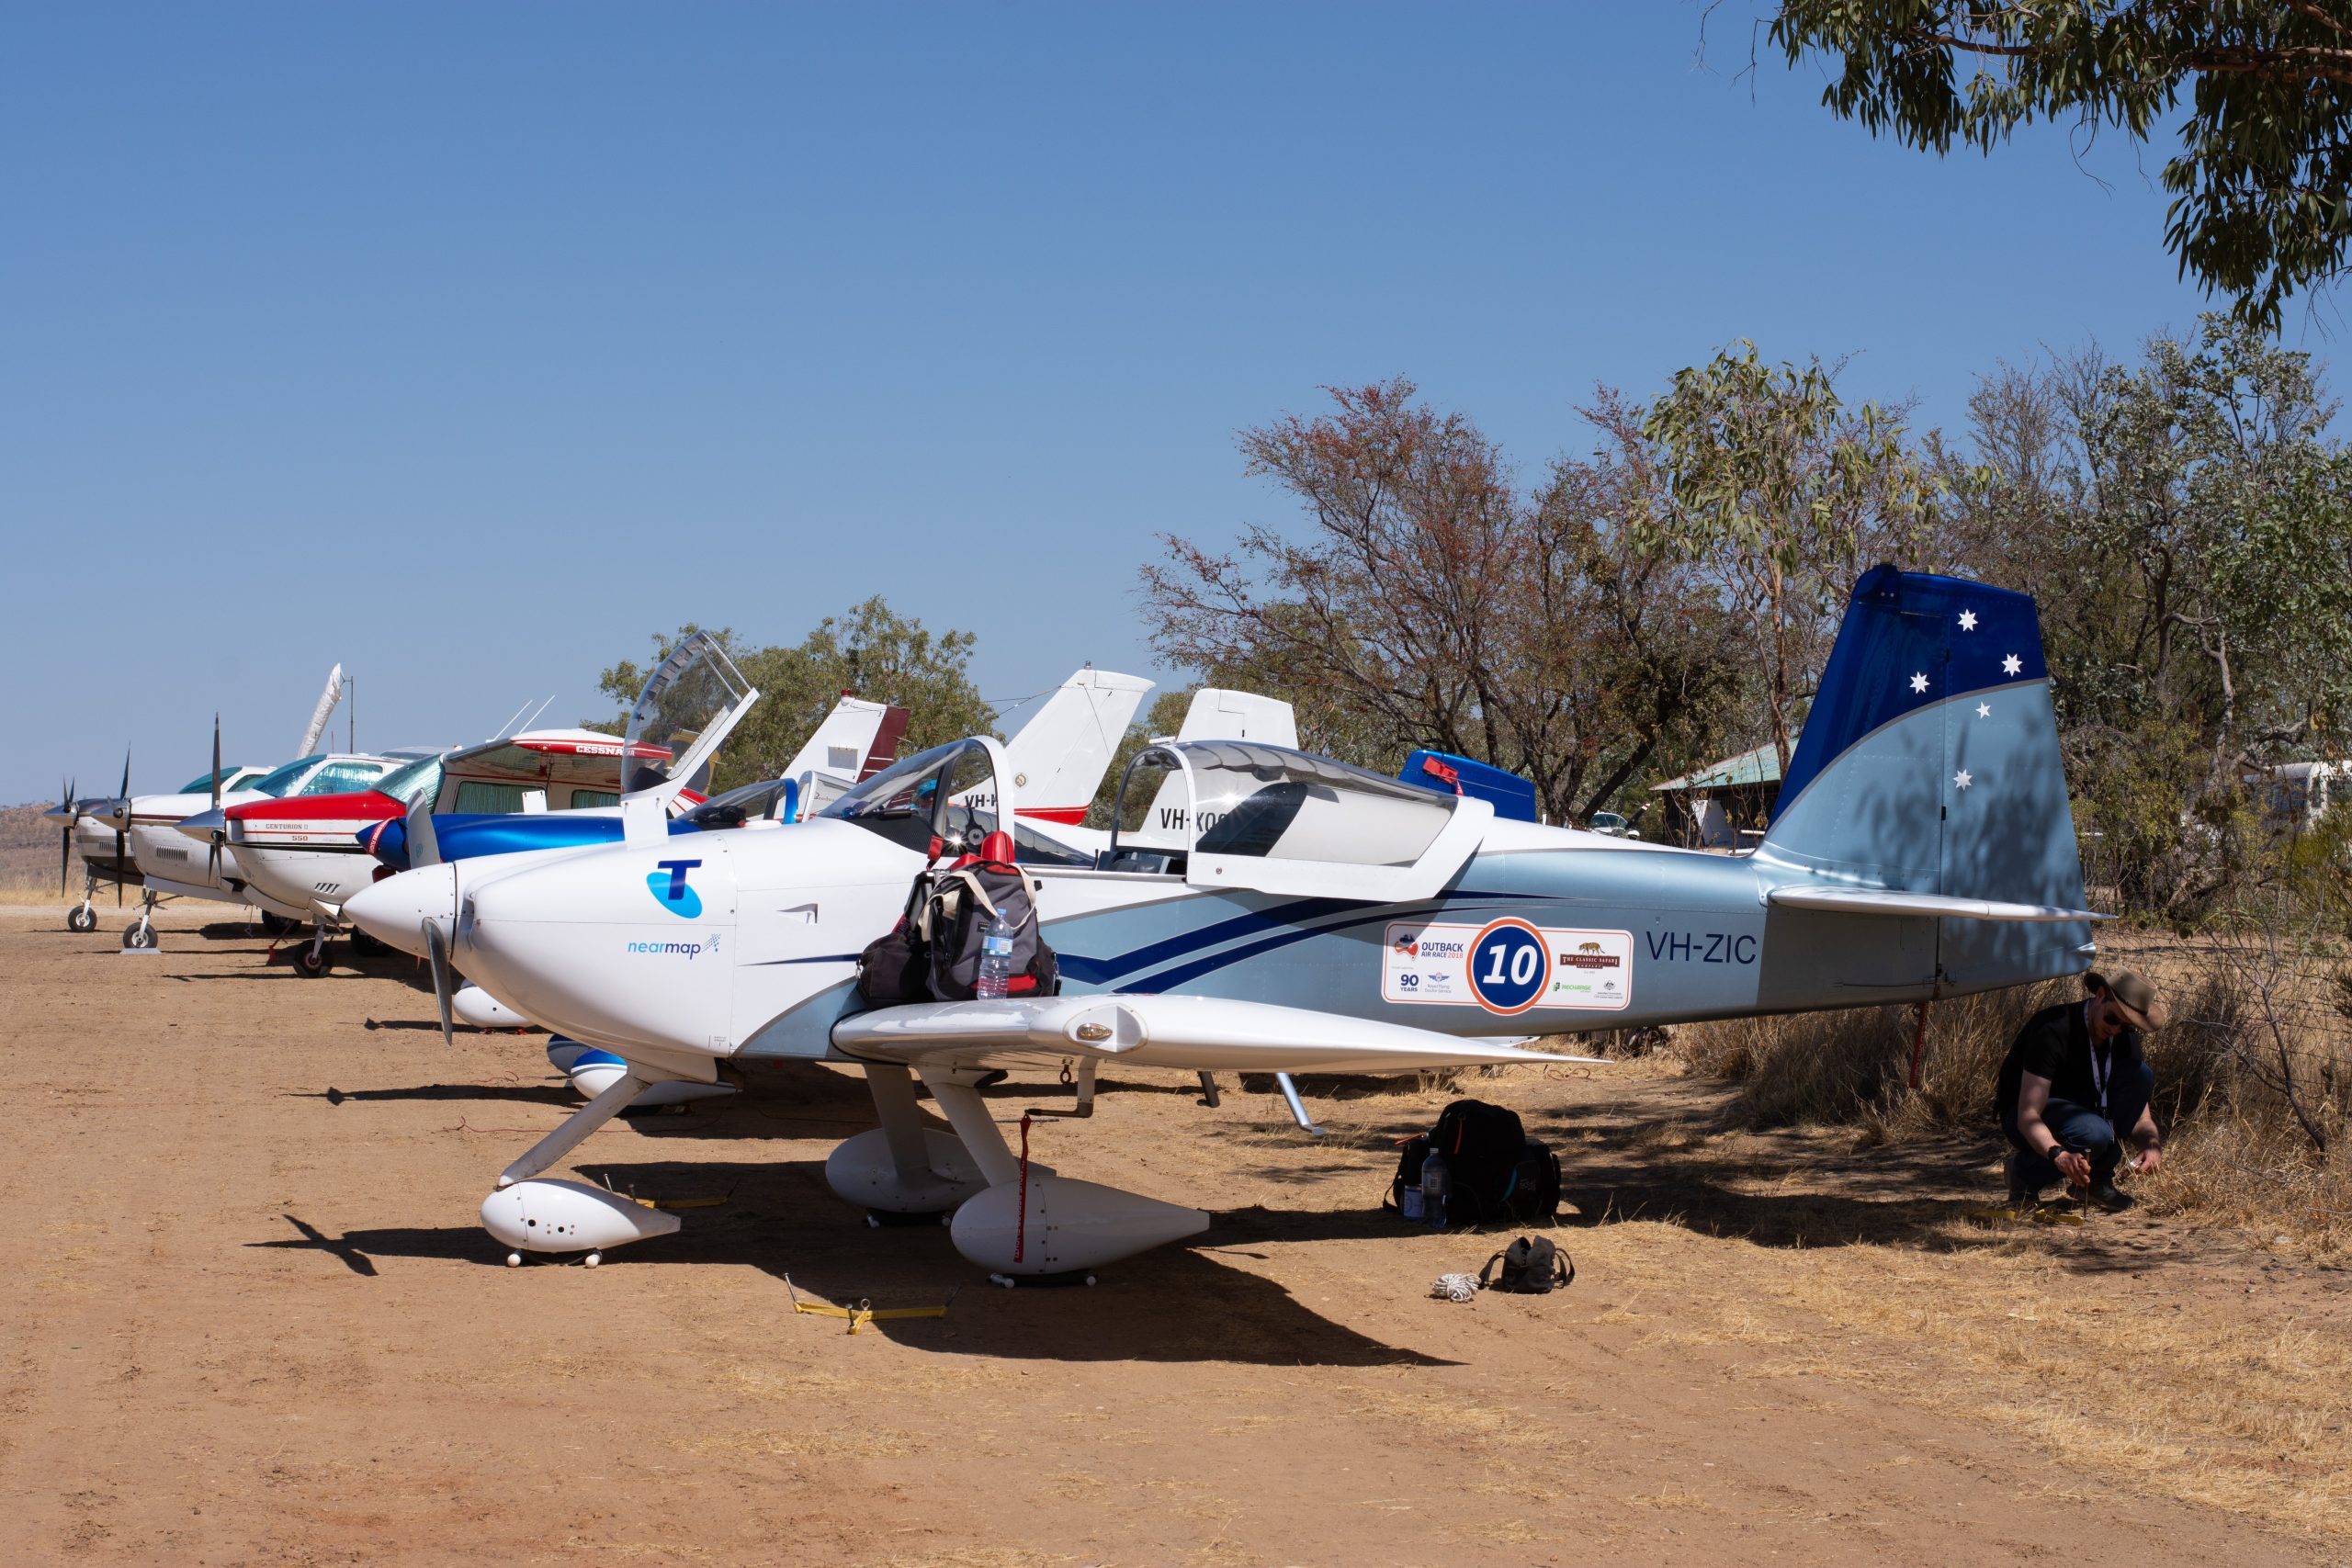 The Outback Air Race is a much-loved charity event